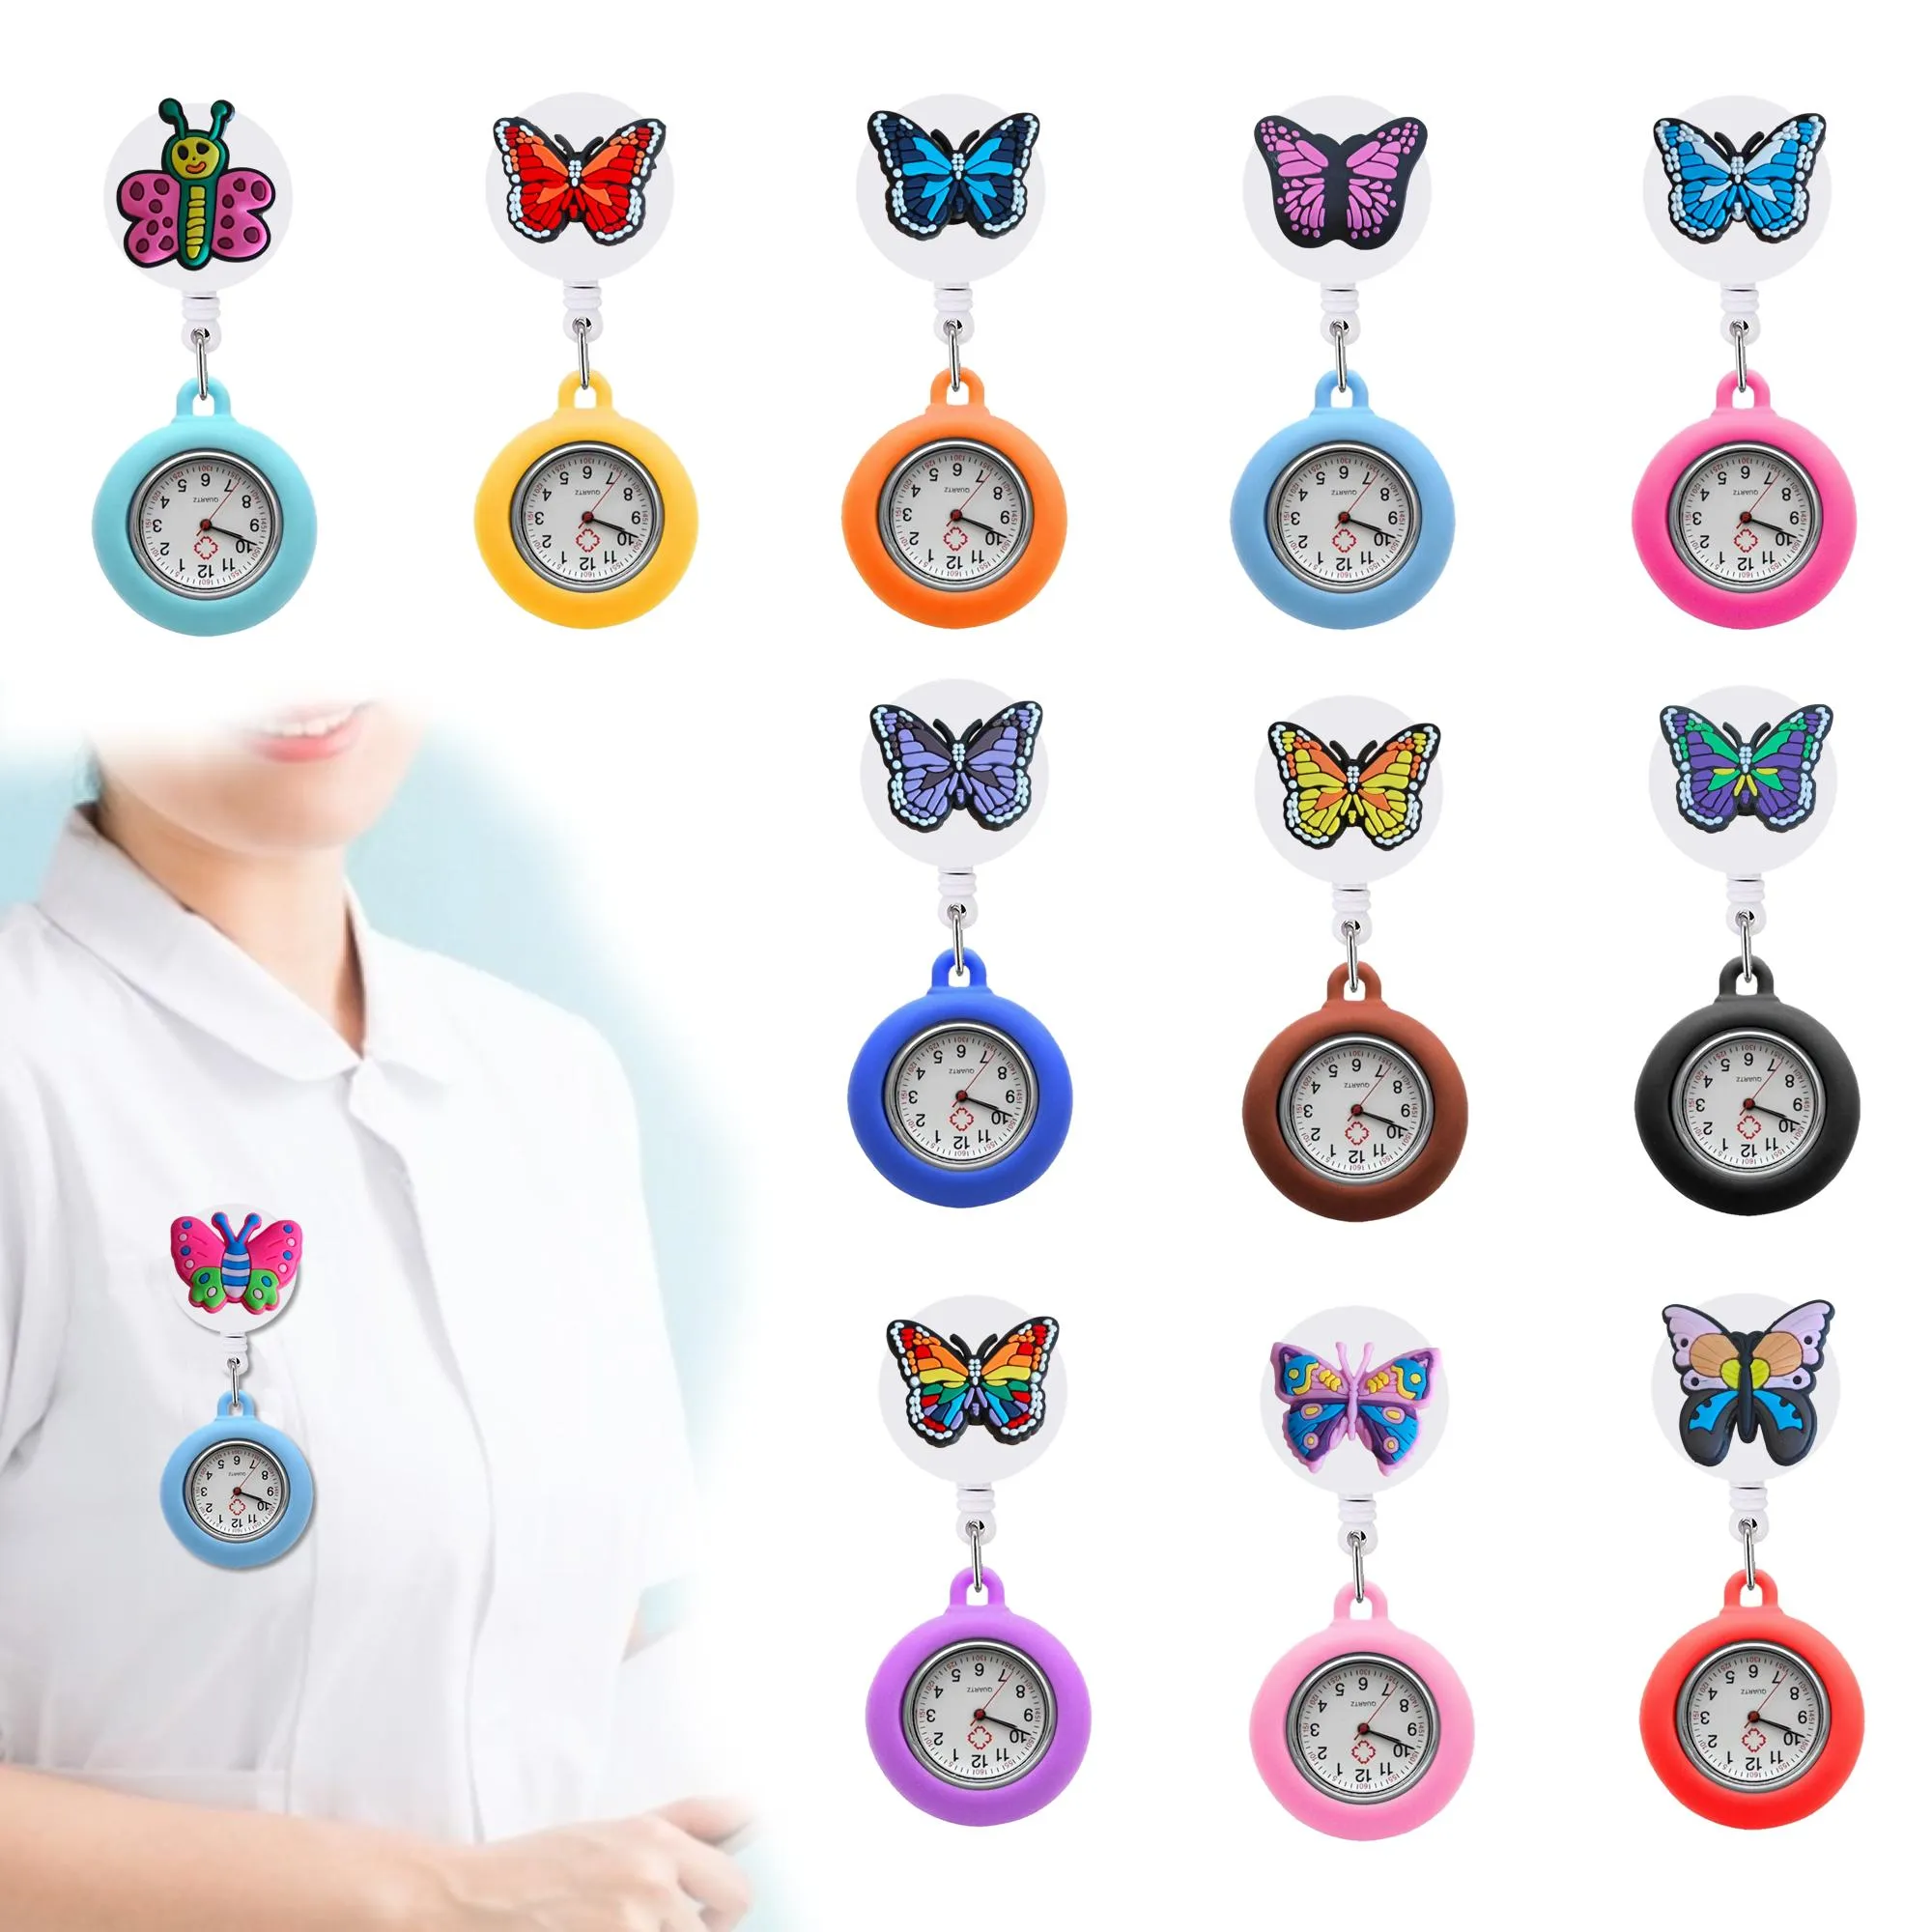 Pocket Watches Colored Butterfly 28 Clip Analog Quartz Hanging Lapel For Women Sile Nurse Watch With Second Hand On Easy To Read Allig Otrvu